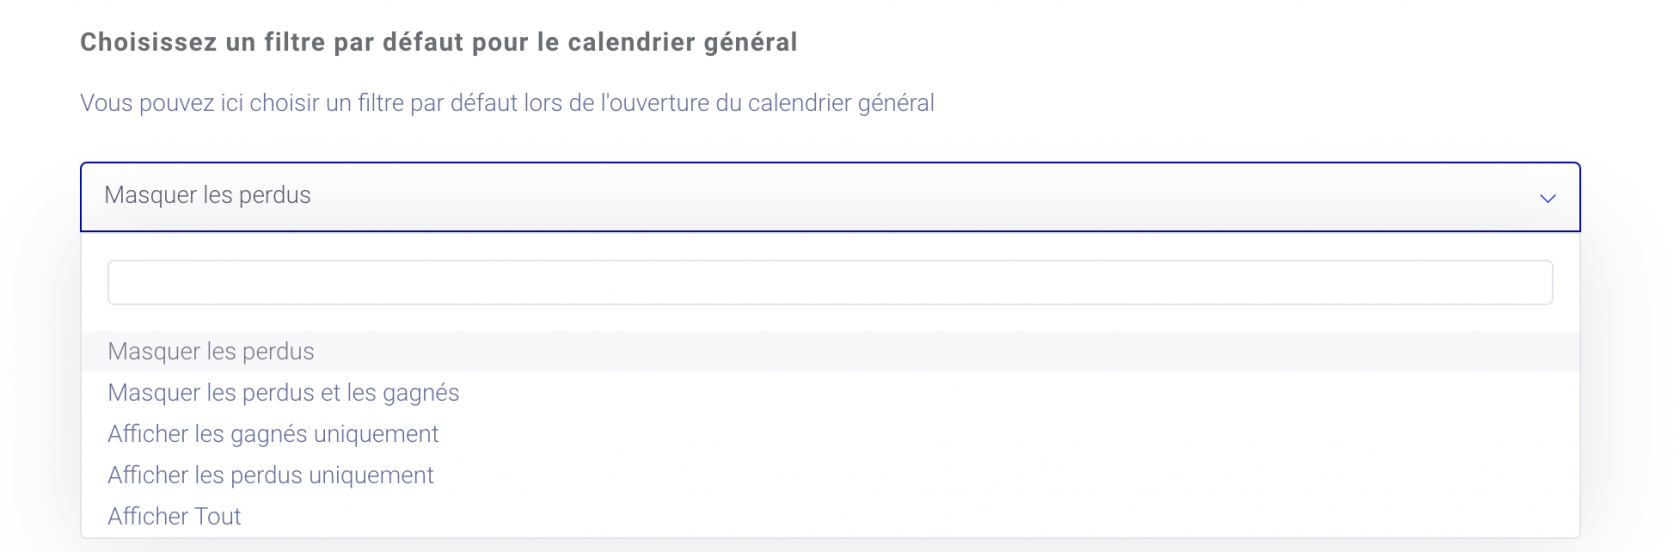 Calendrier-global.png